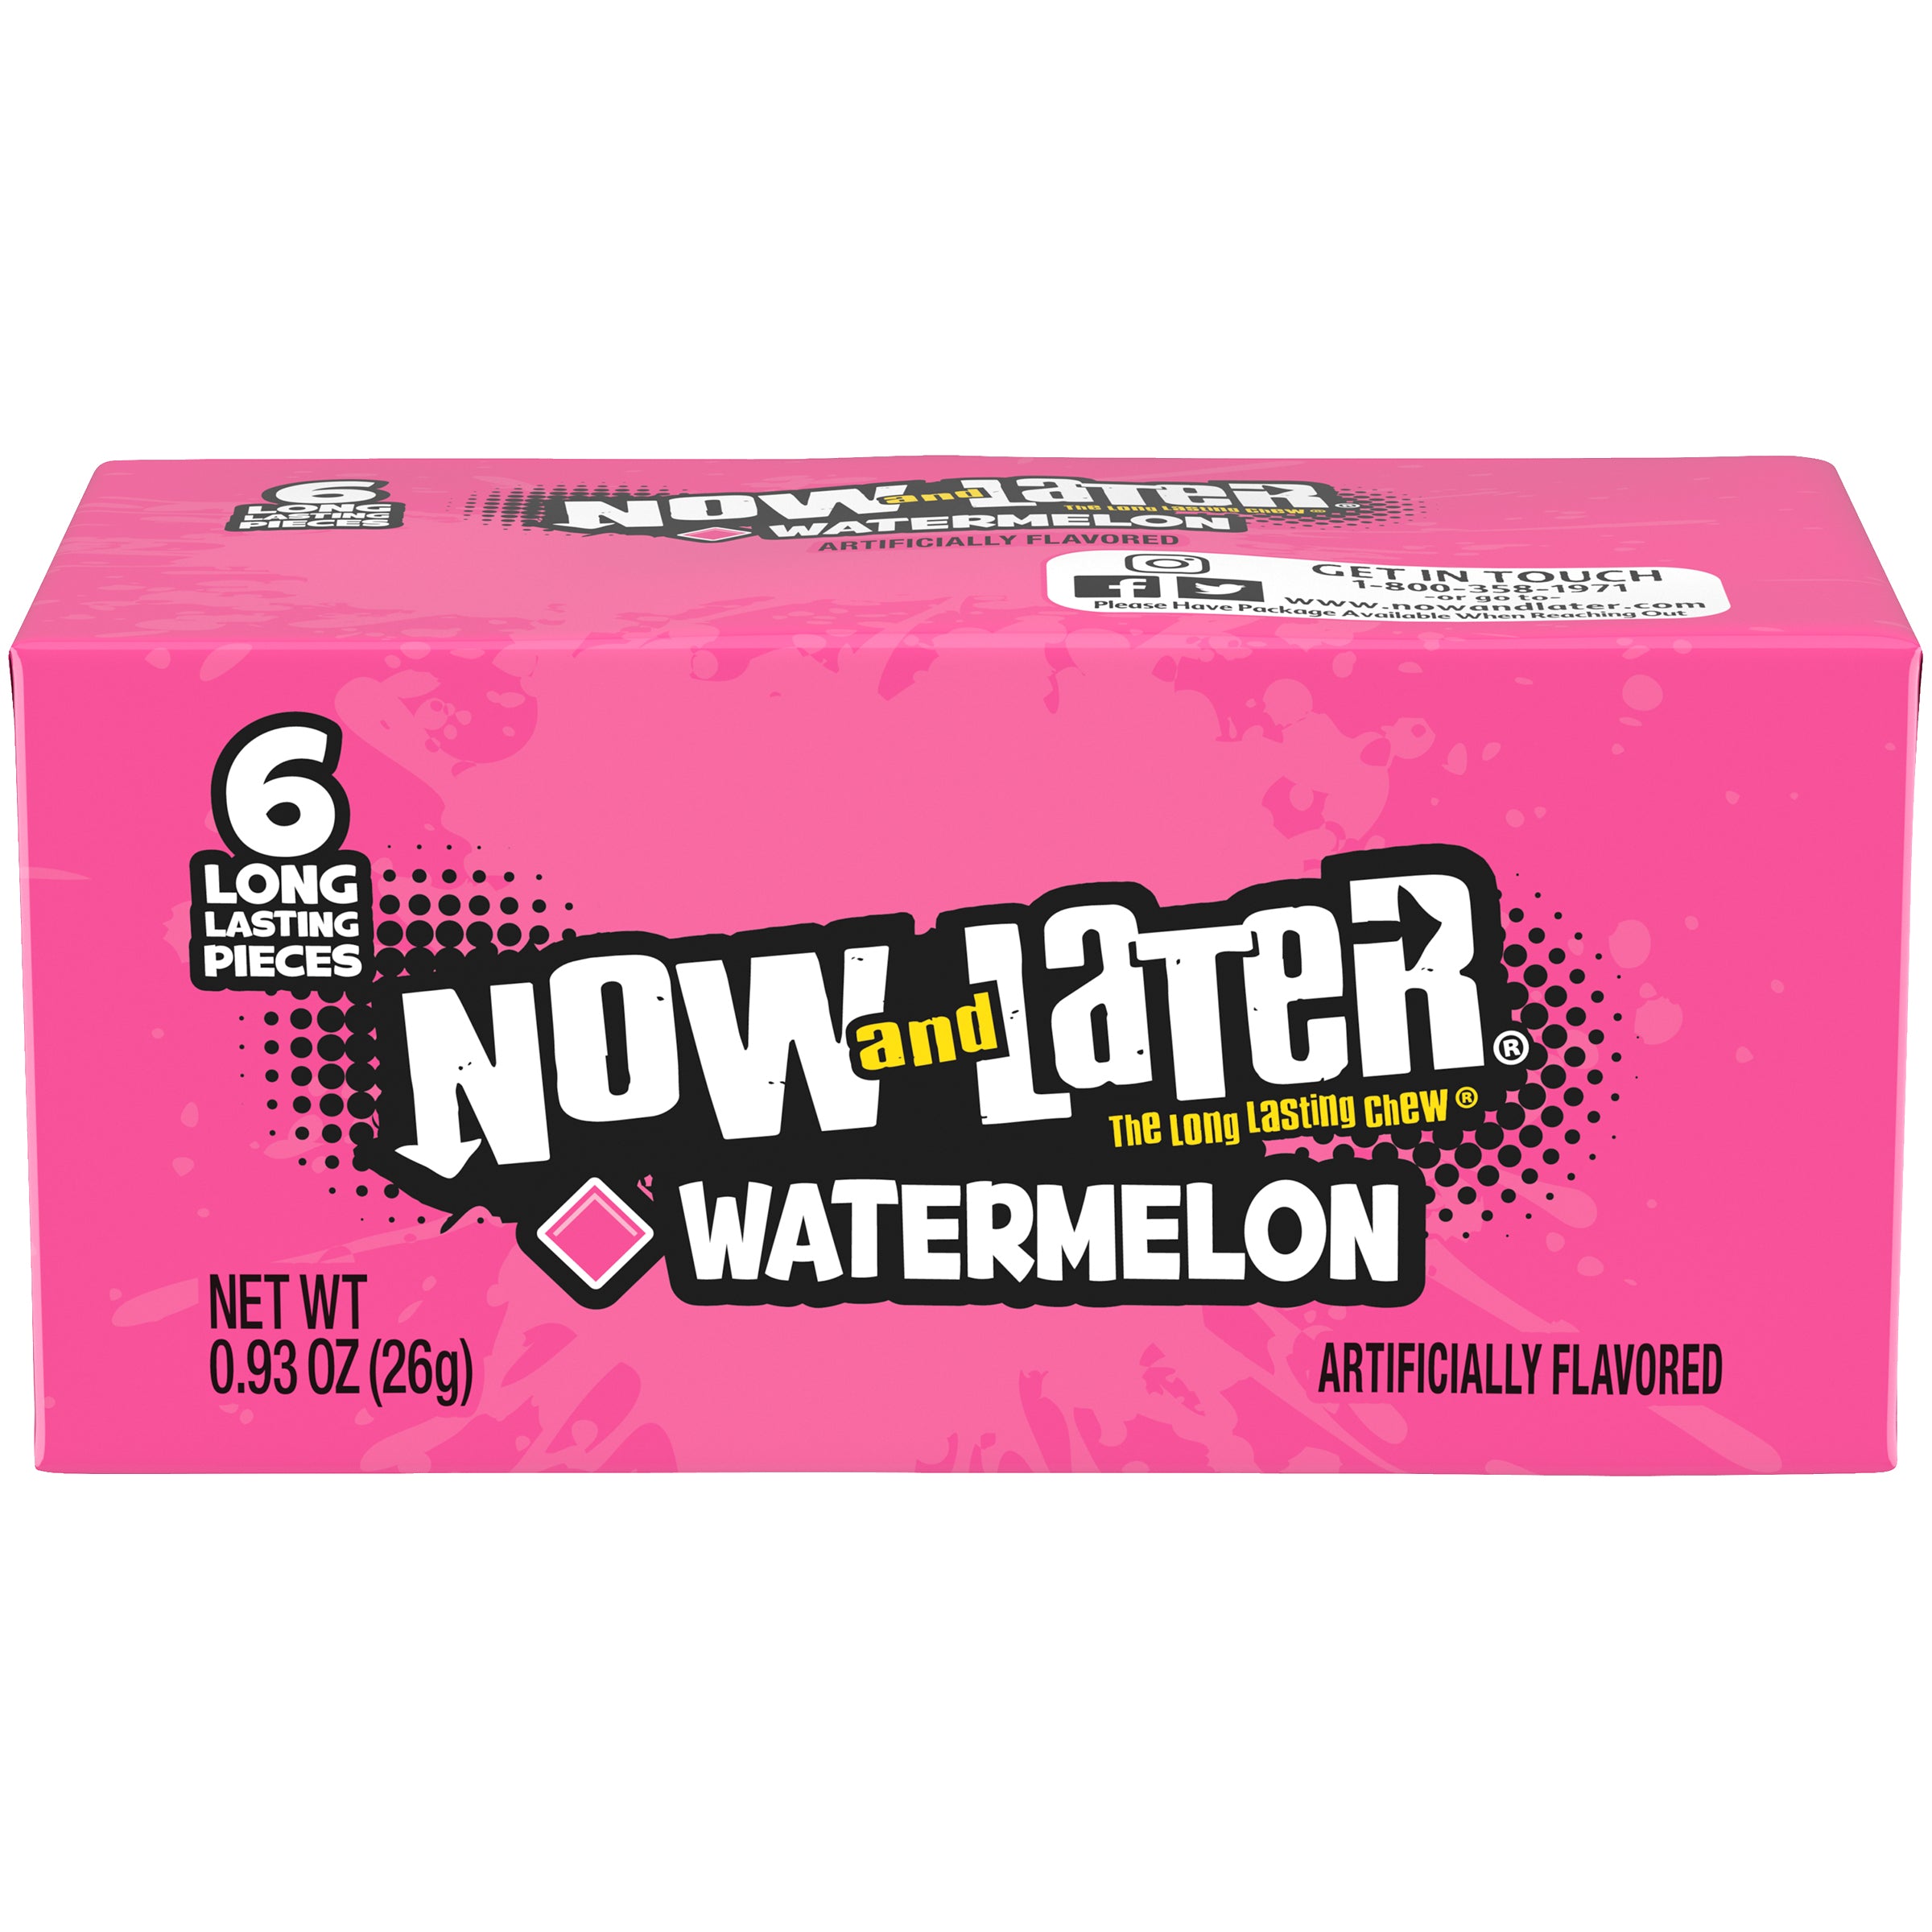 NOW AND LATER - WATERMELON